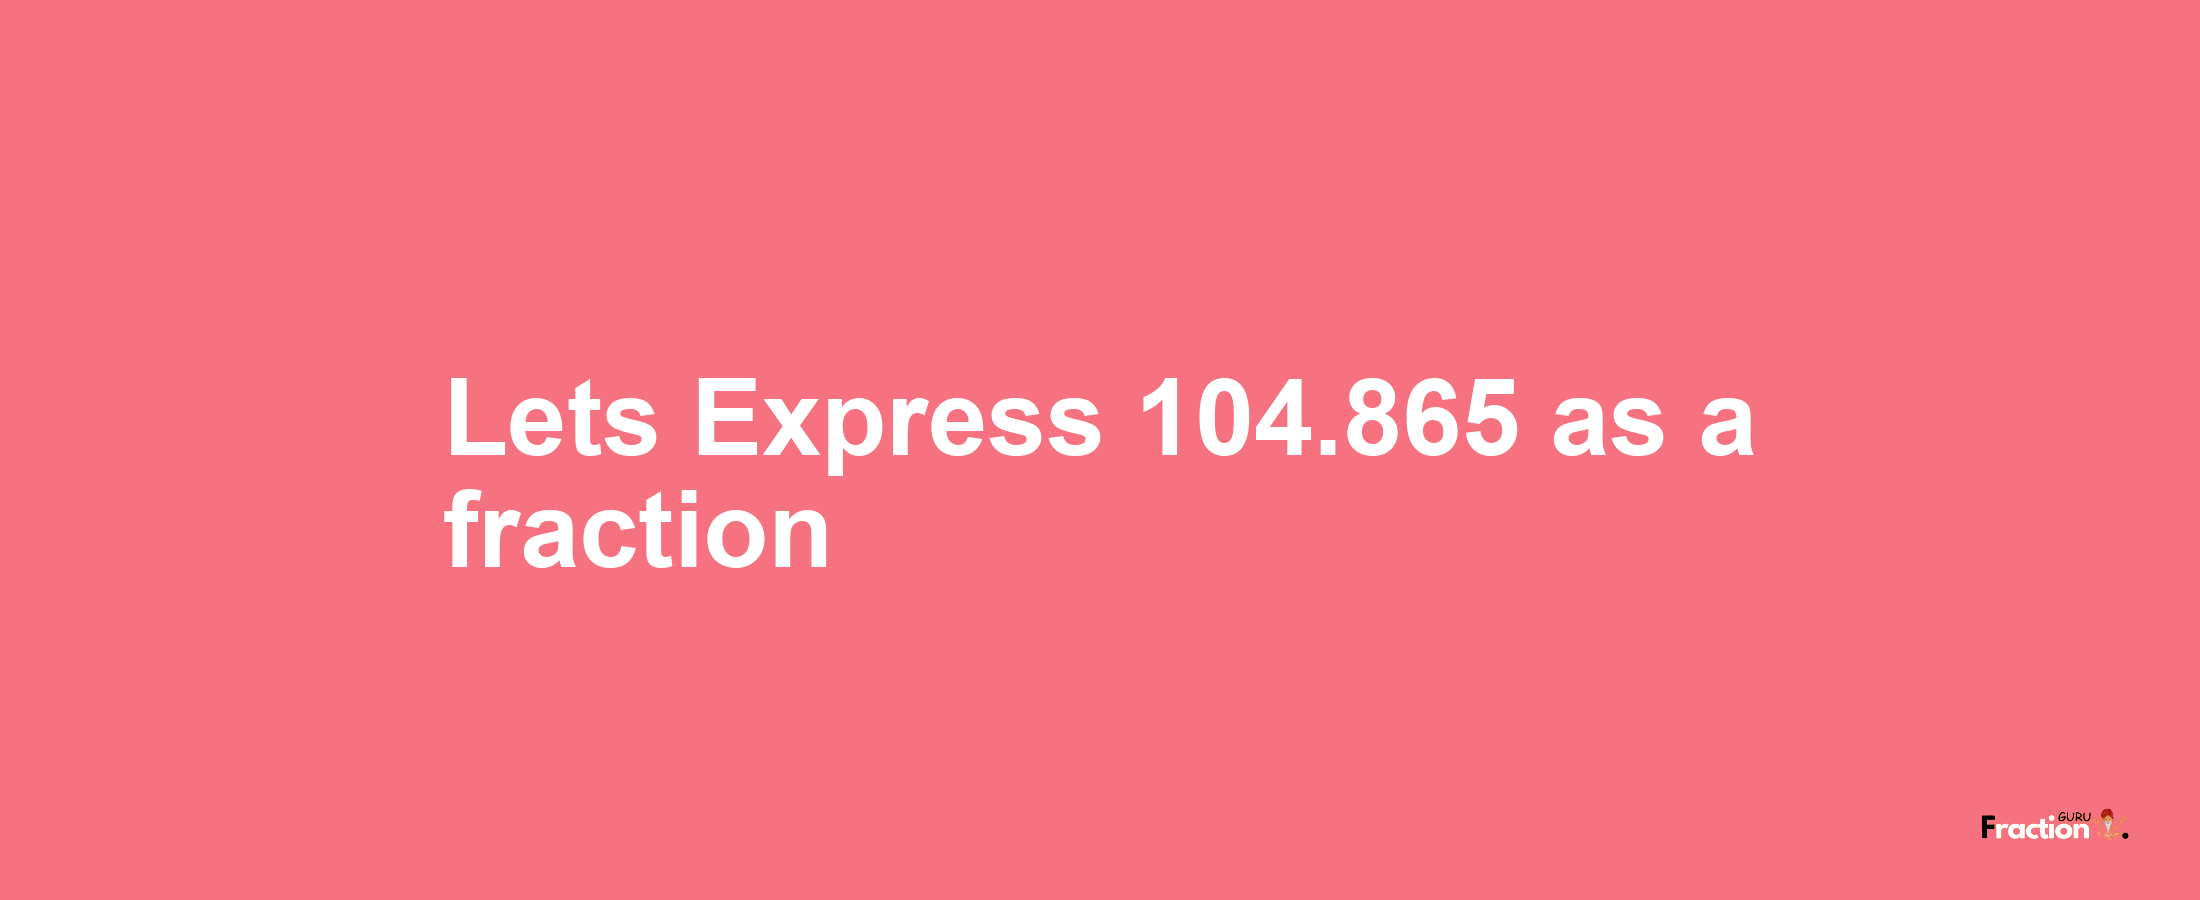 Lets Express 104.865 as afraction